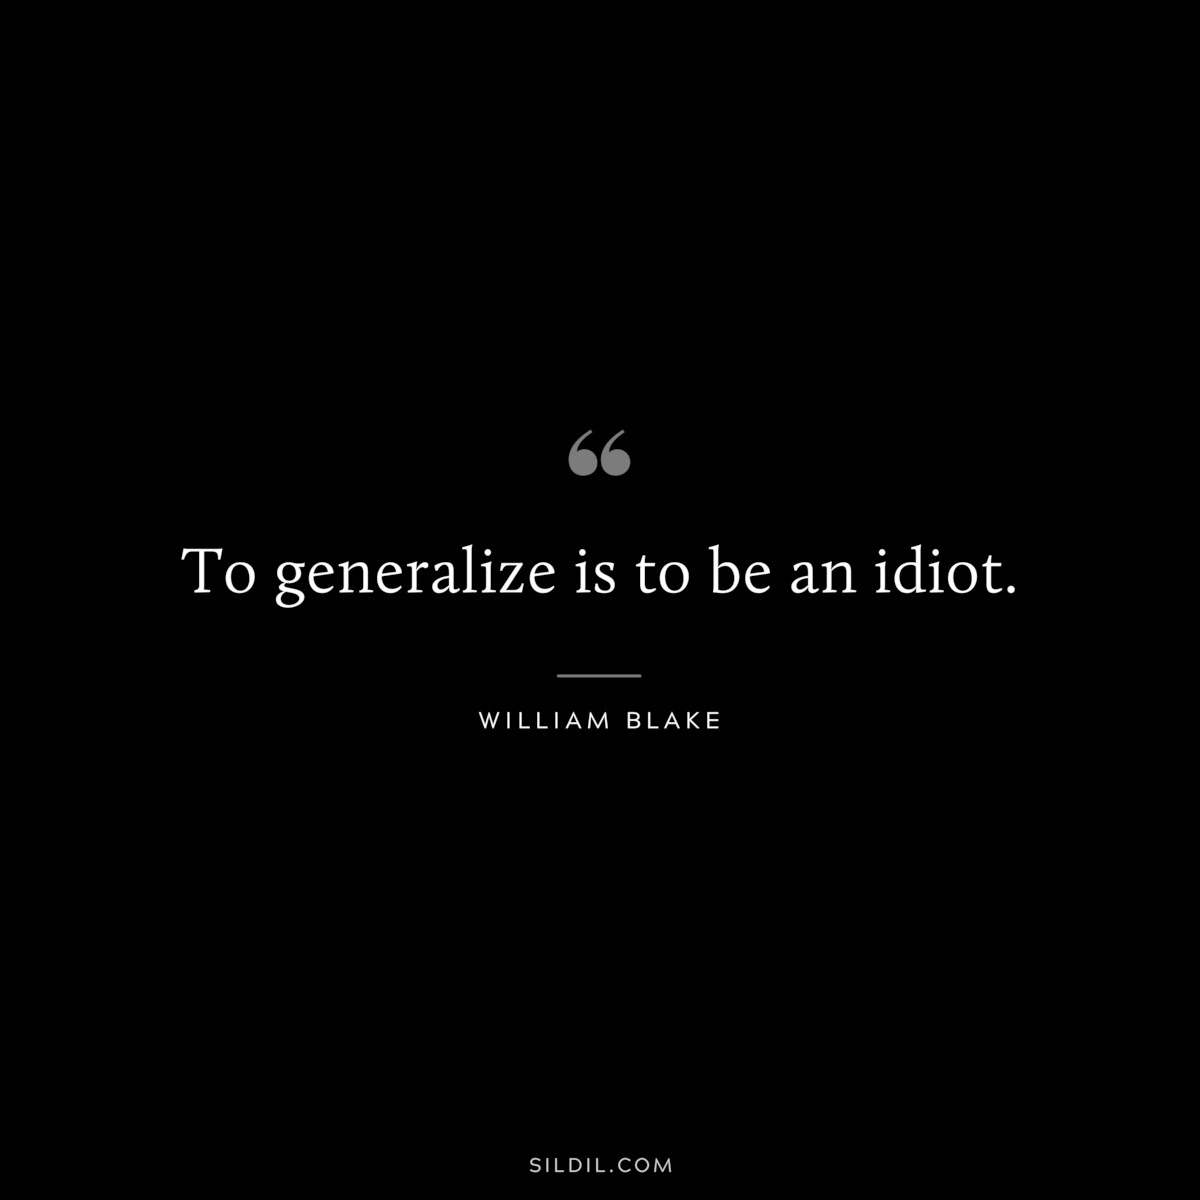 To generalize is to be an idiot. ― William Blake